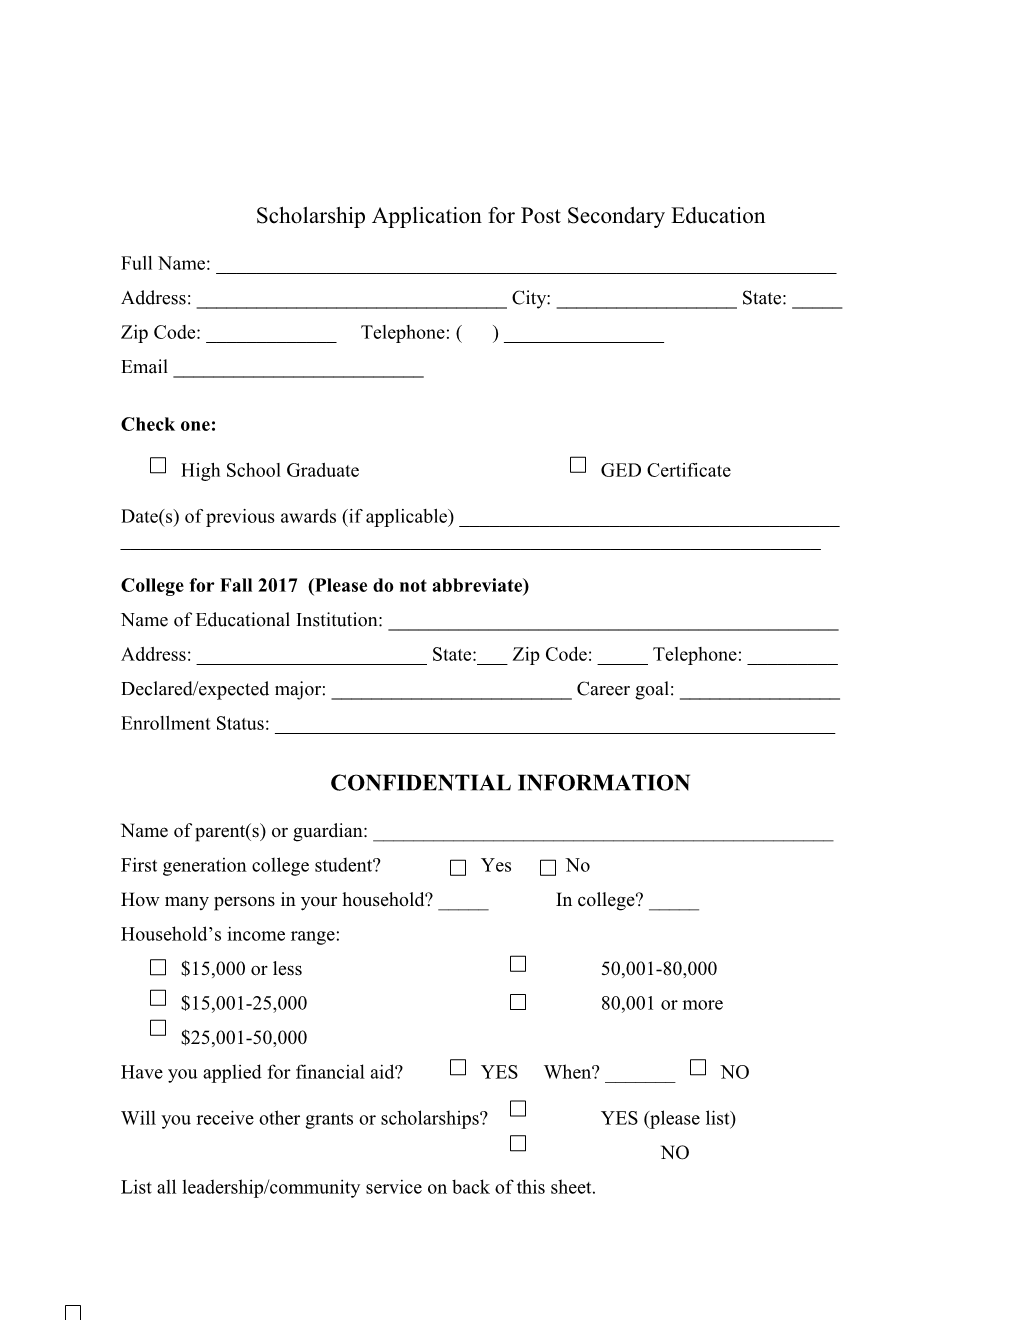 Scholarship Application for Post Secondary Education